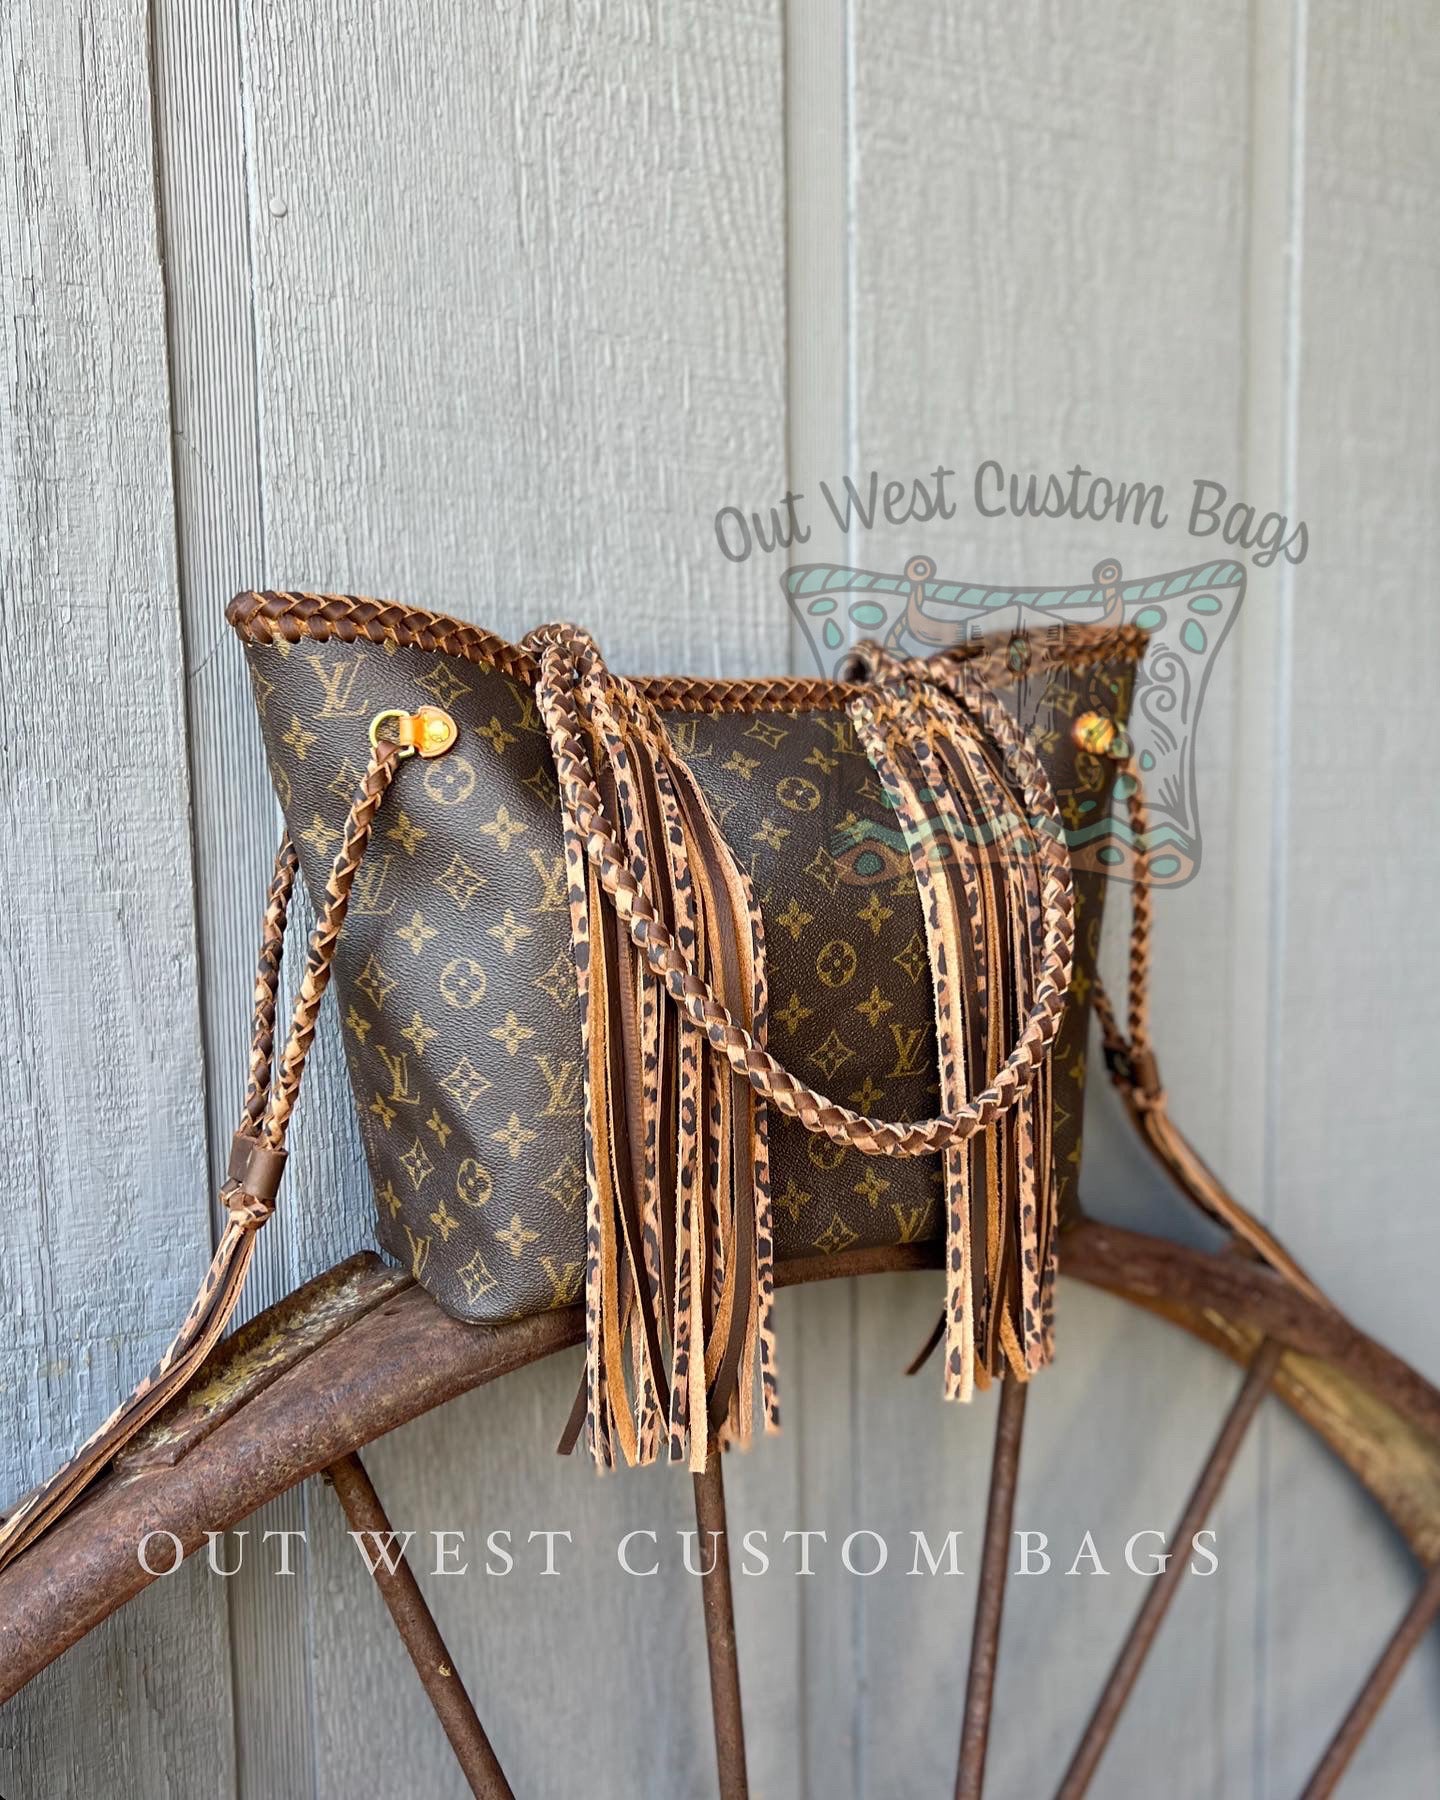 neverfull with strap